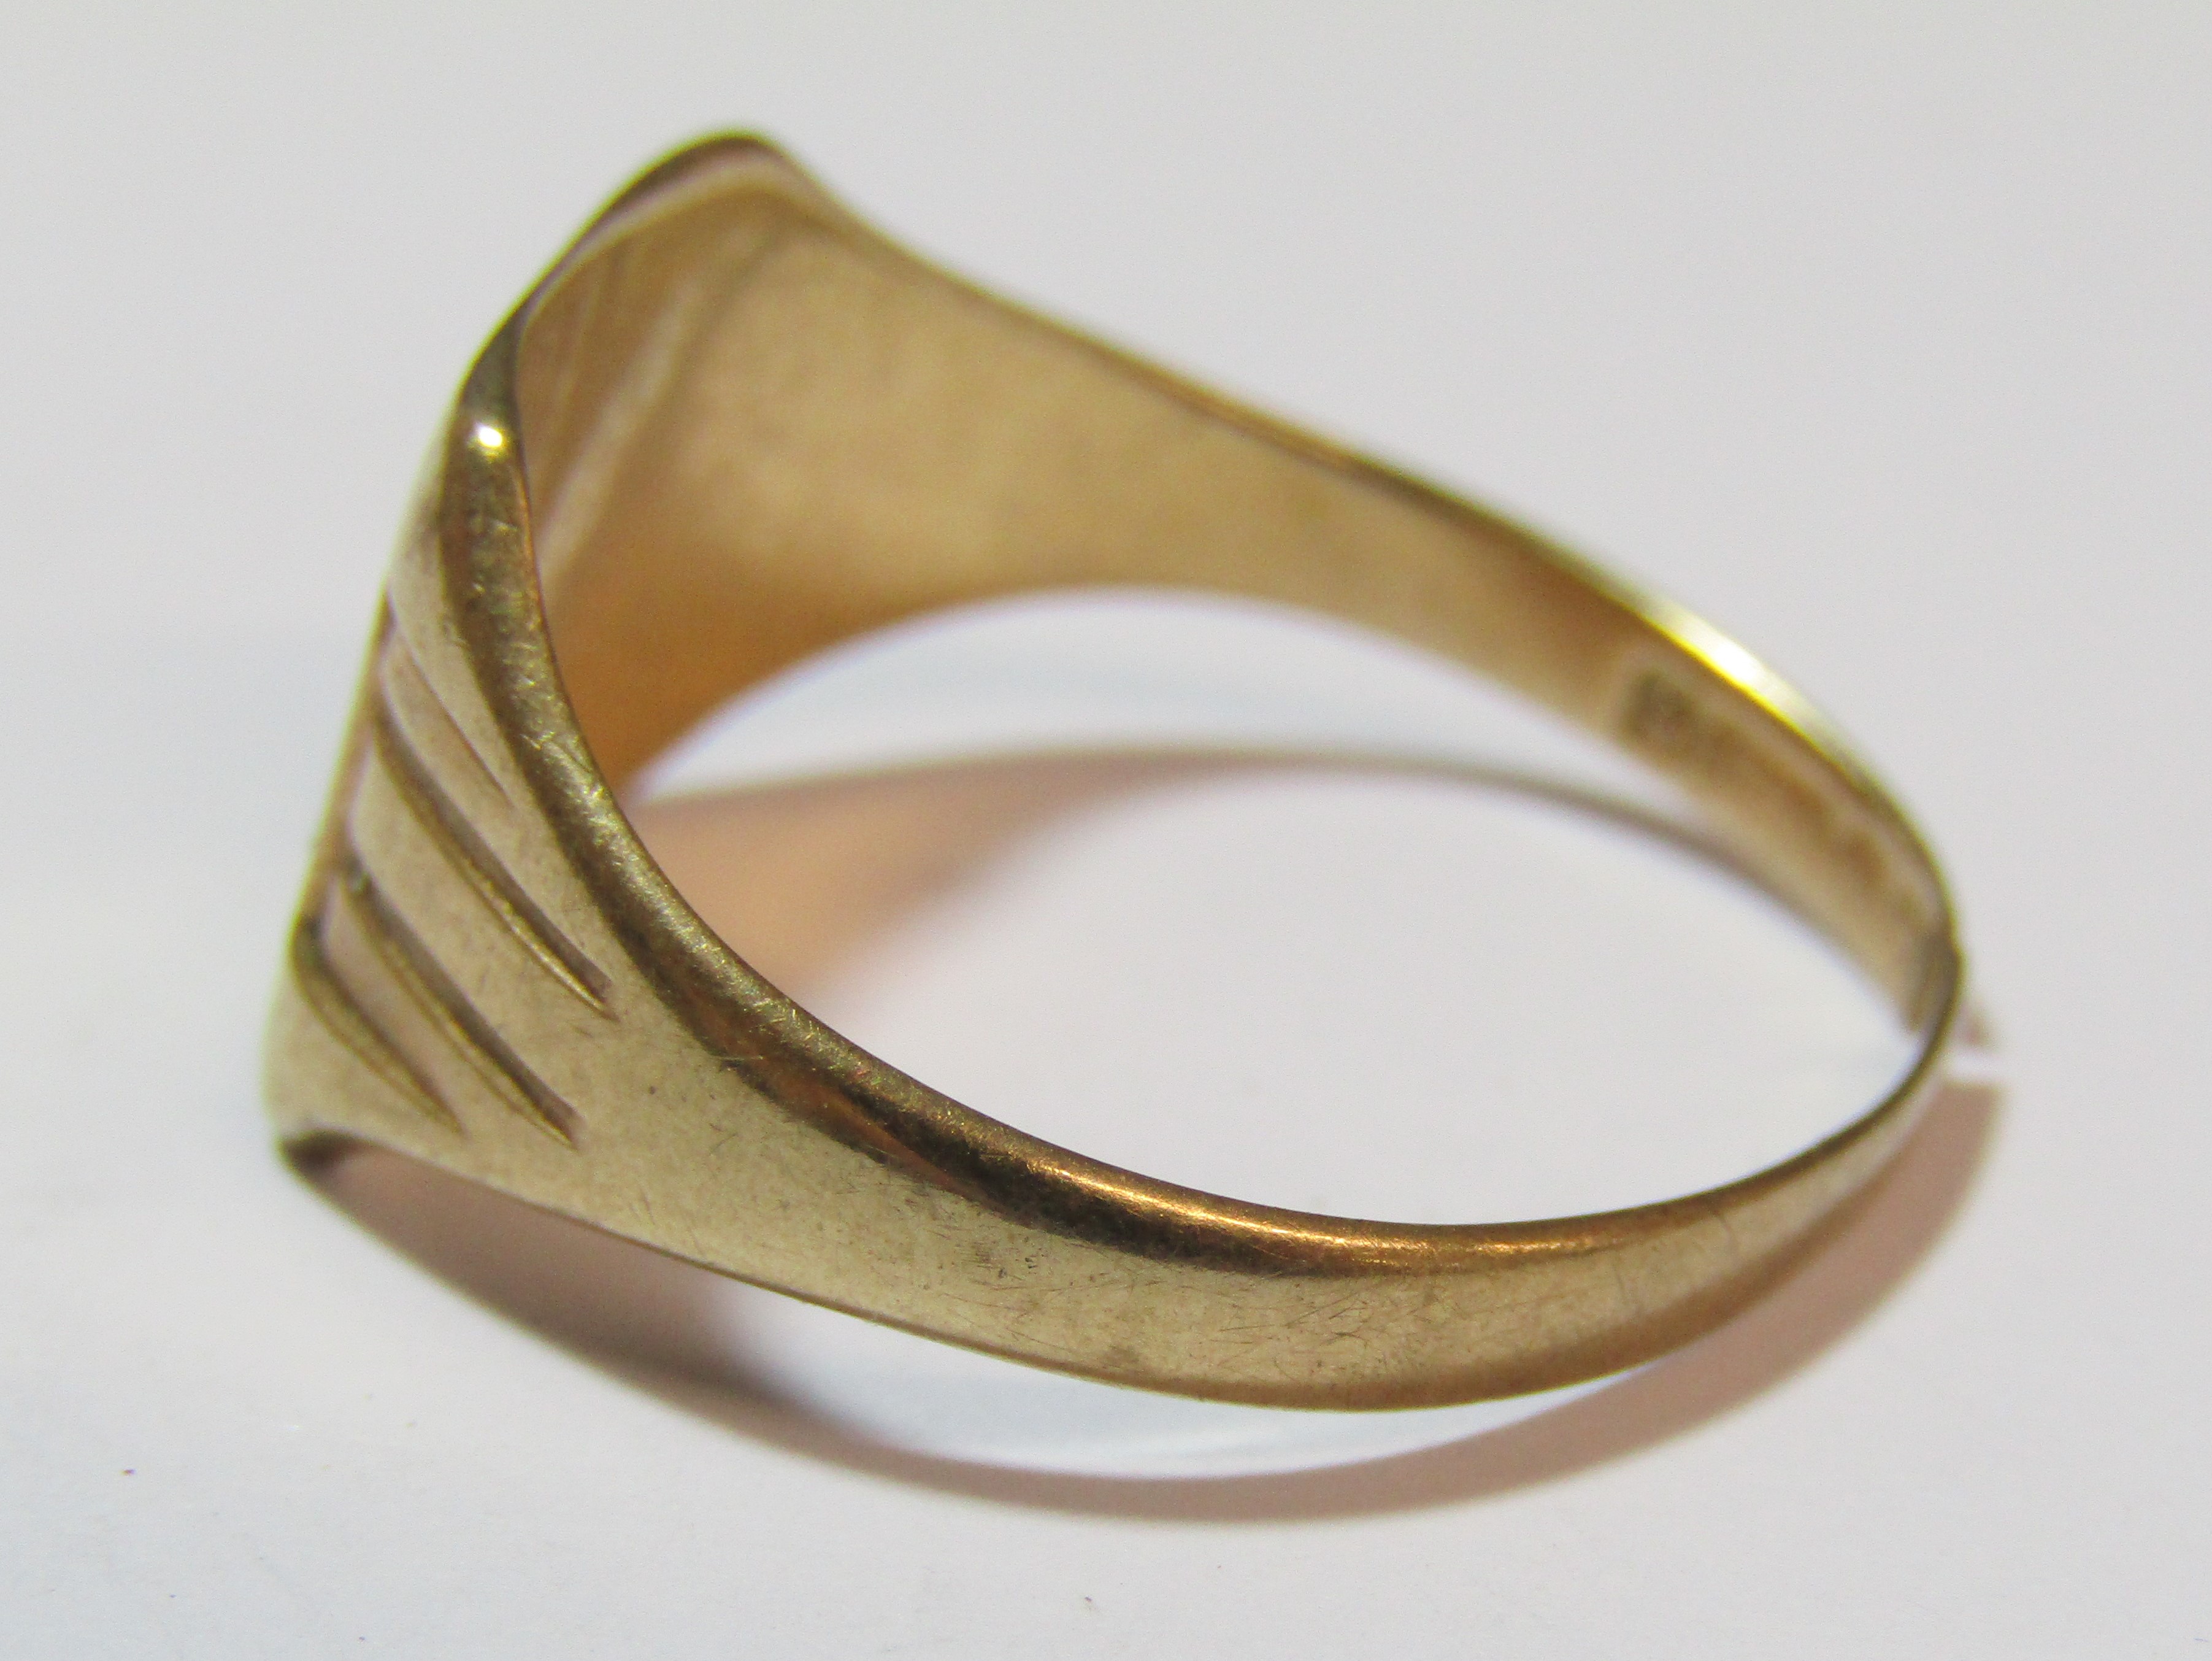 3 rings - 9ct gold signet ring engraved 'EDH' ((broken), ring size Q 2.3g - tested as 9ct with cubic - Image 11 of 14